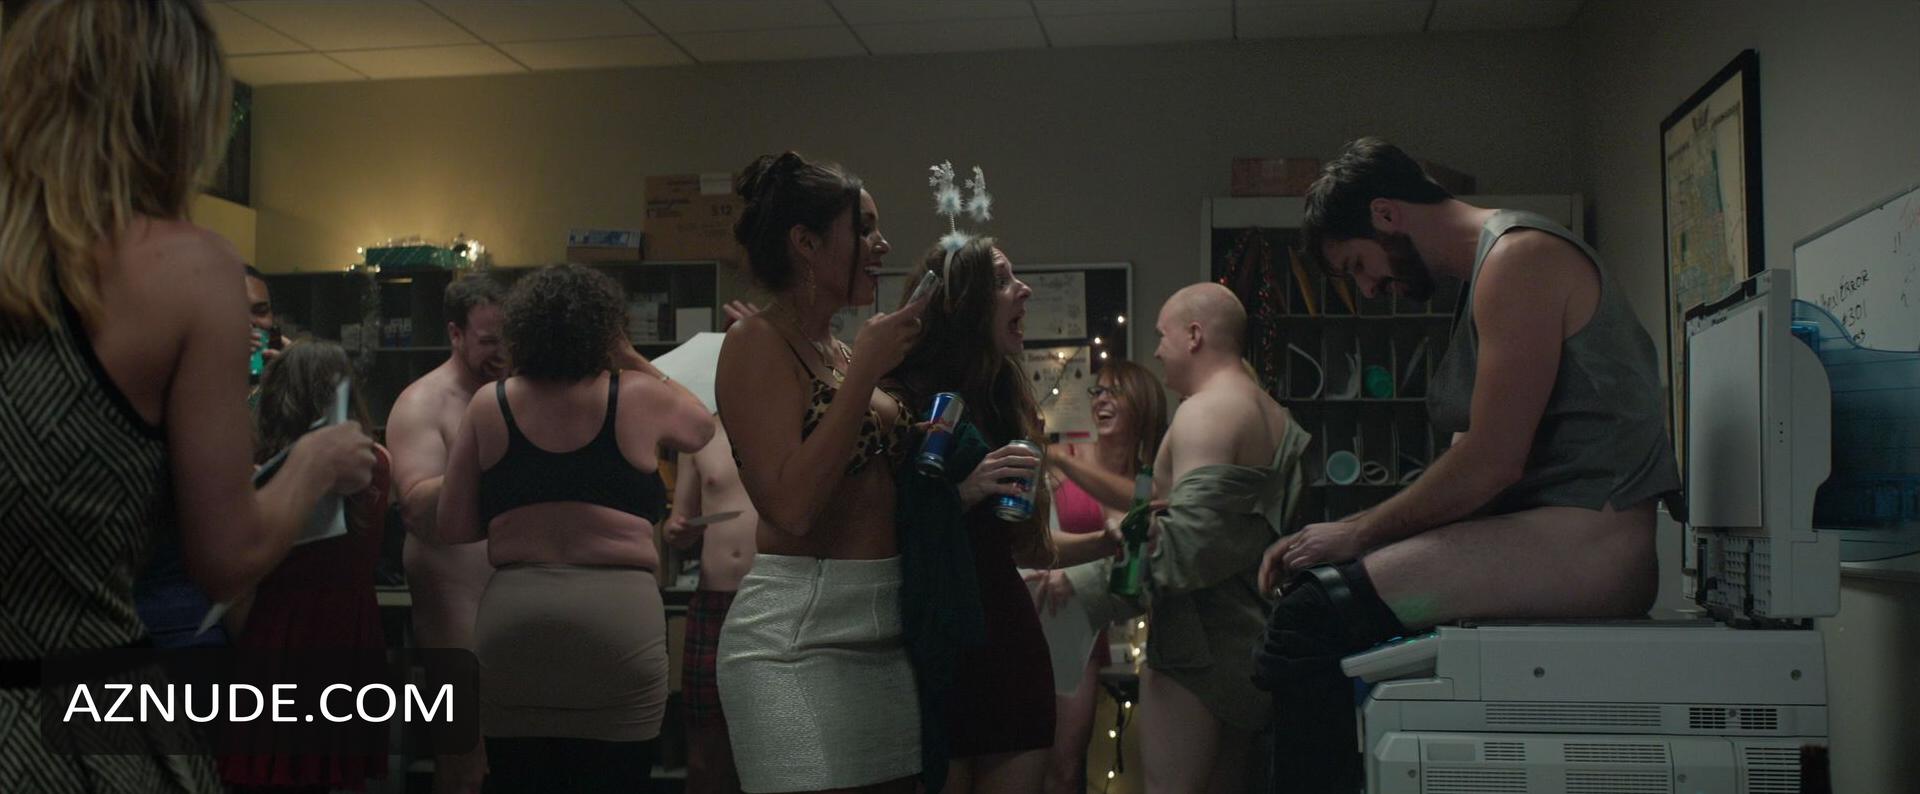 Best of Office christmas party nude scenes